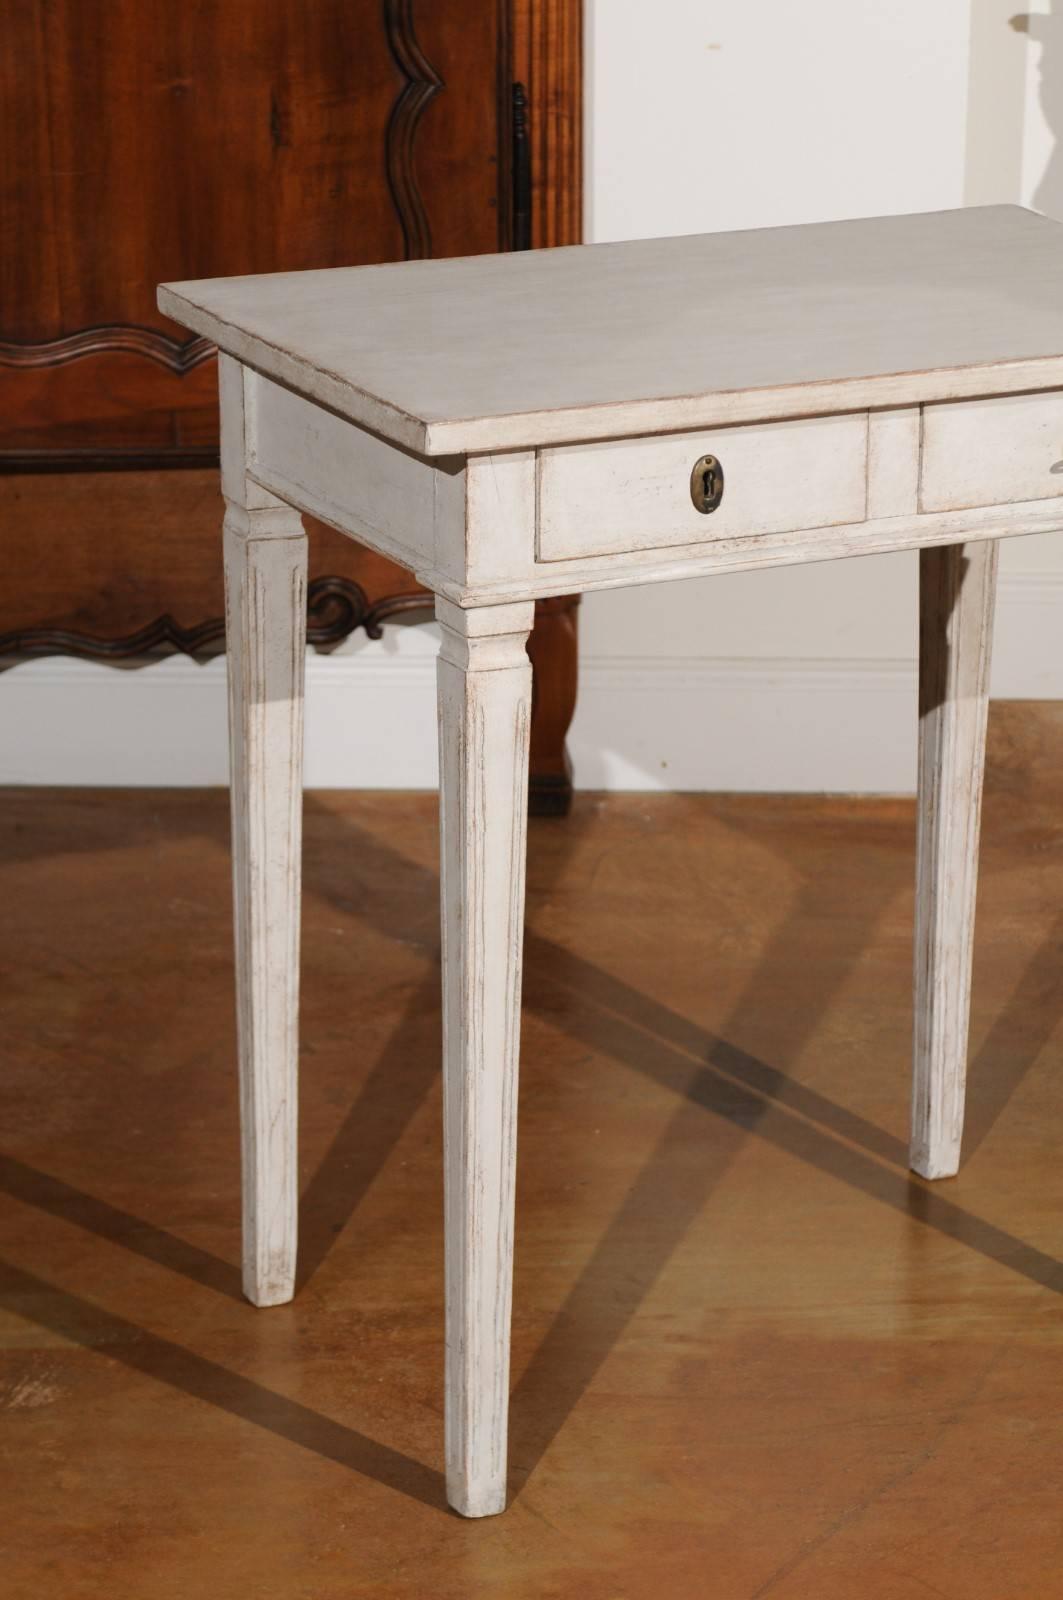 19th Century Swedish 1860s Gustavian Style Painted Side Table with Drawers and Tapered Legs